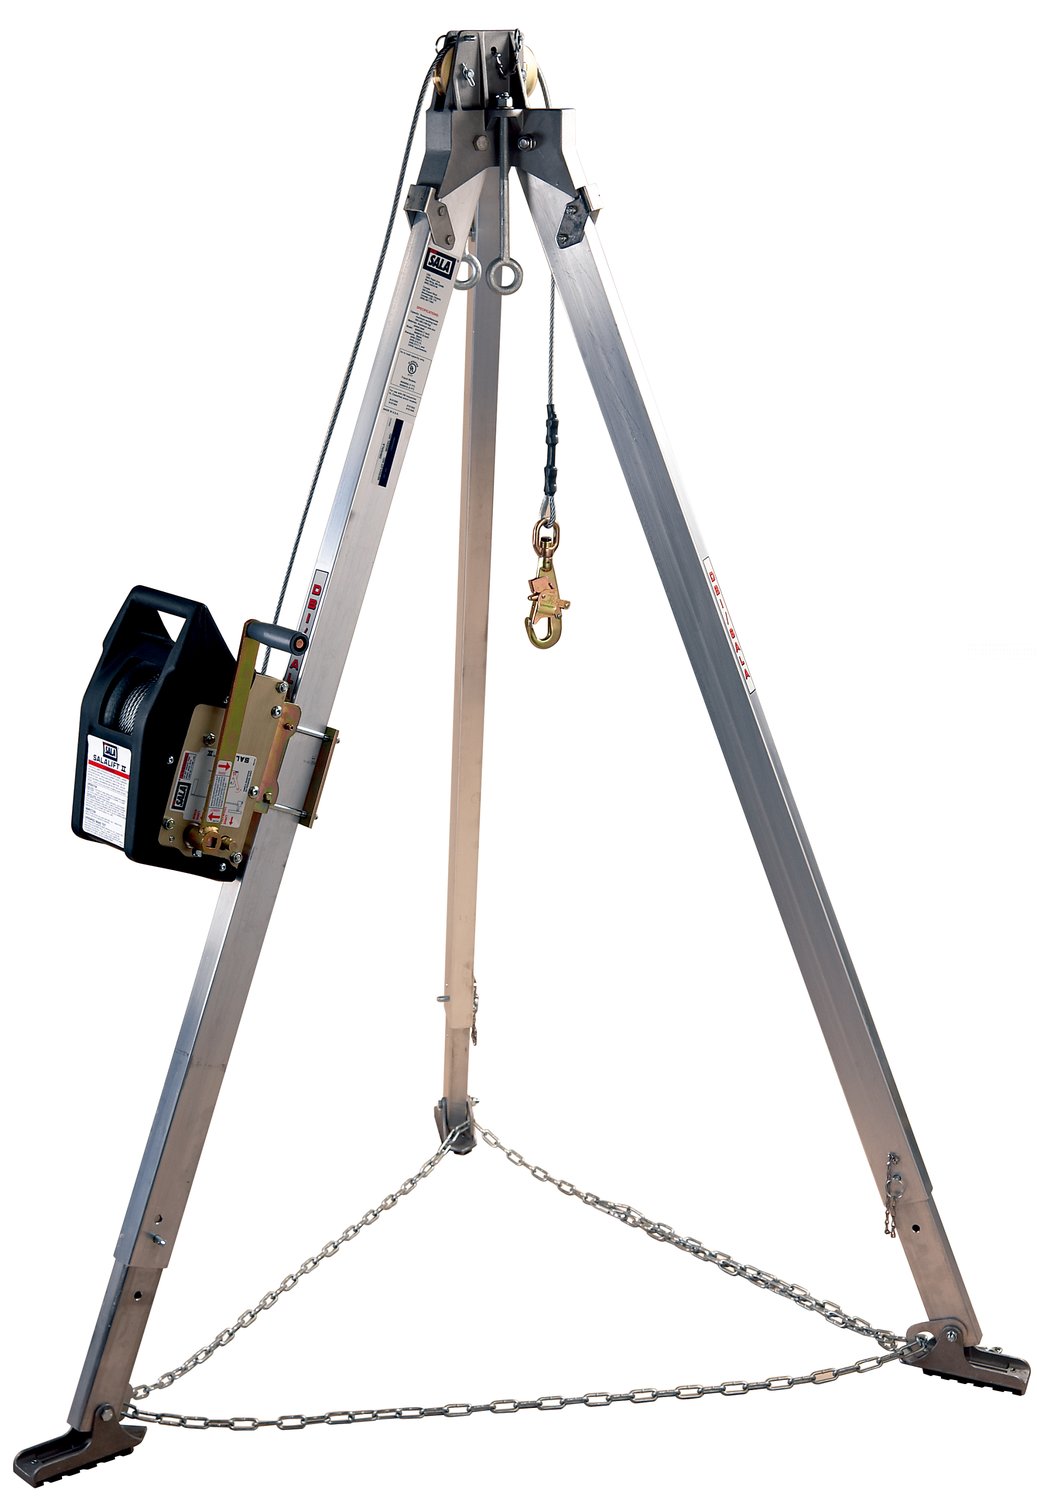 7012820462 - 3M DBI-SALA Confined Space Aluminum Tripod with Winch 8300034, 7 ft High, 120 ft Galvanized Cable